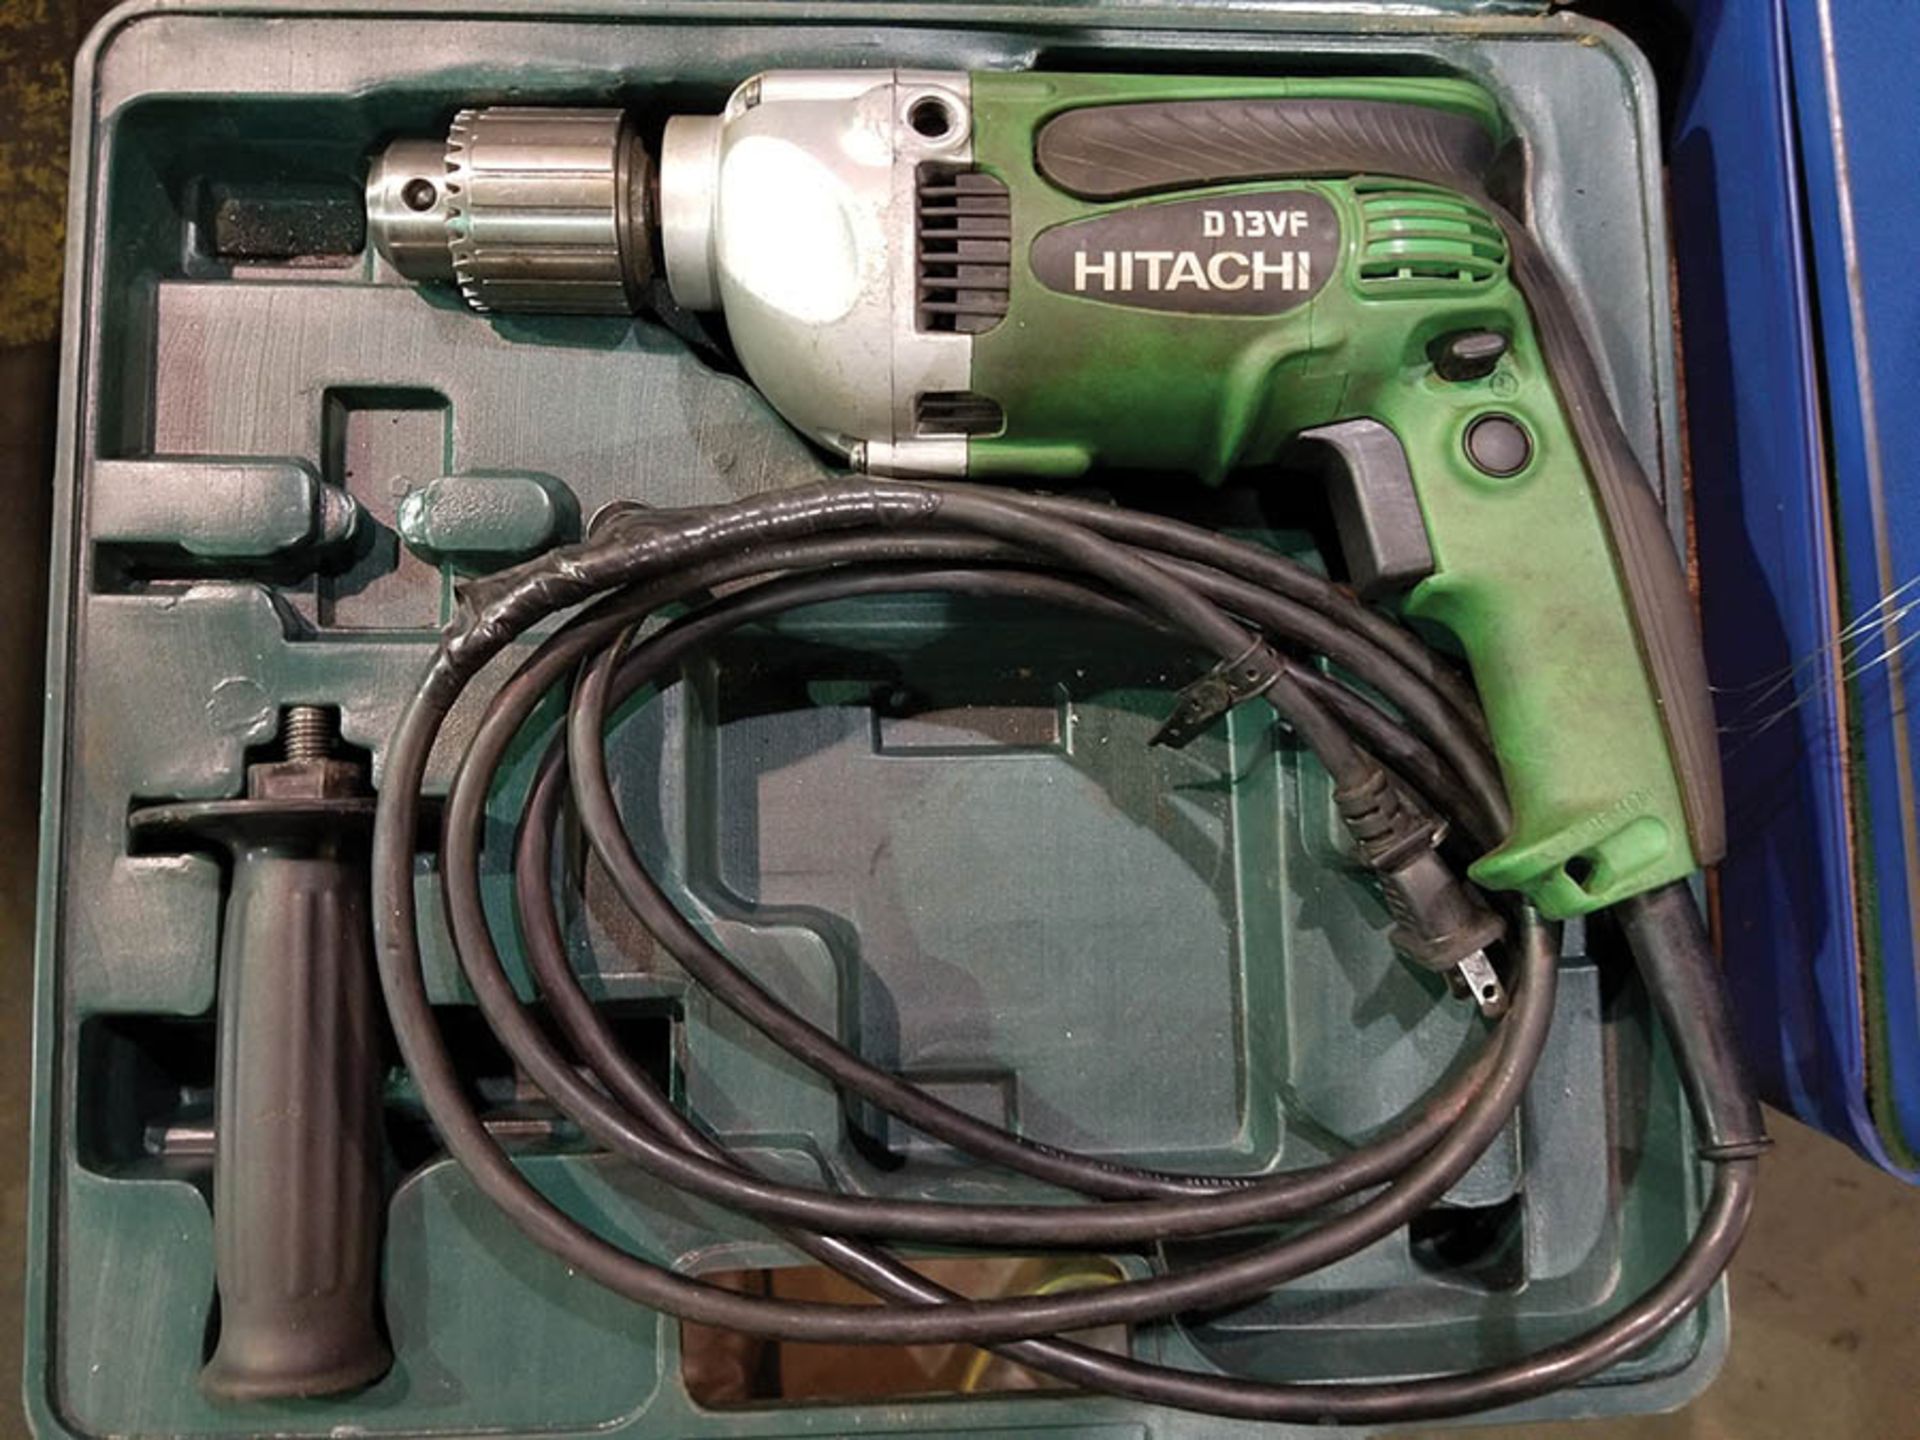 HITACHI 1/2" ELECTRIC DRILL, MODEL D13VF WITH CASE - Image 3 of 3